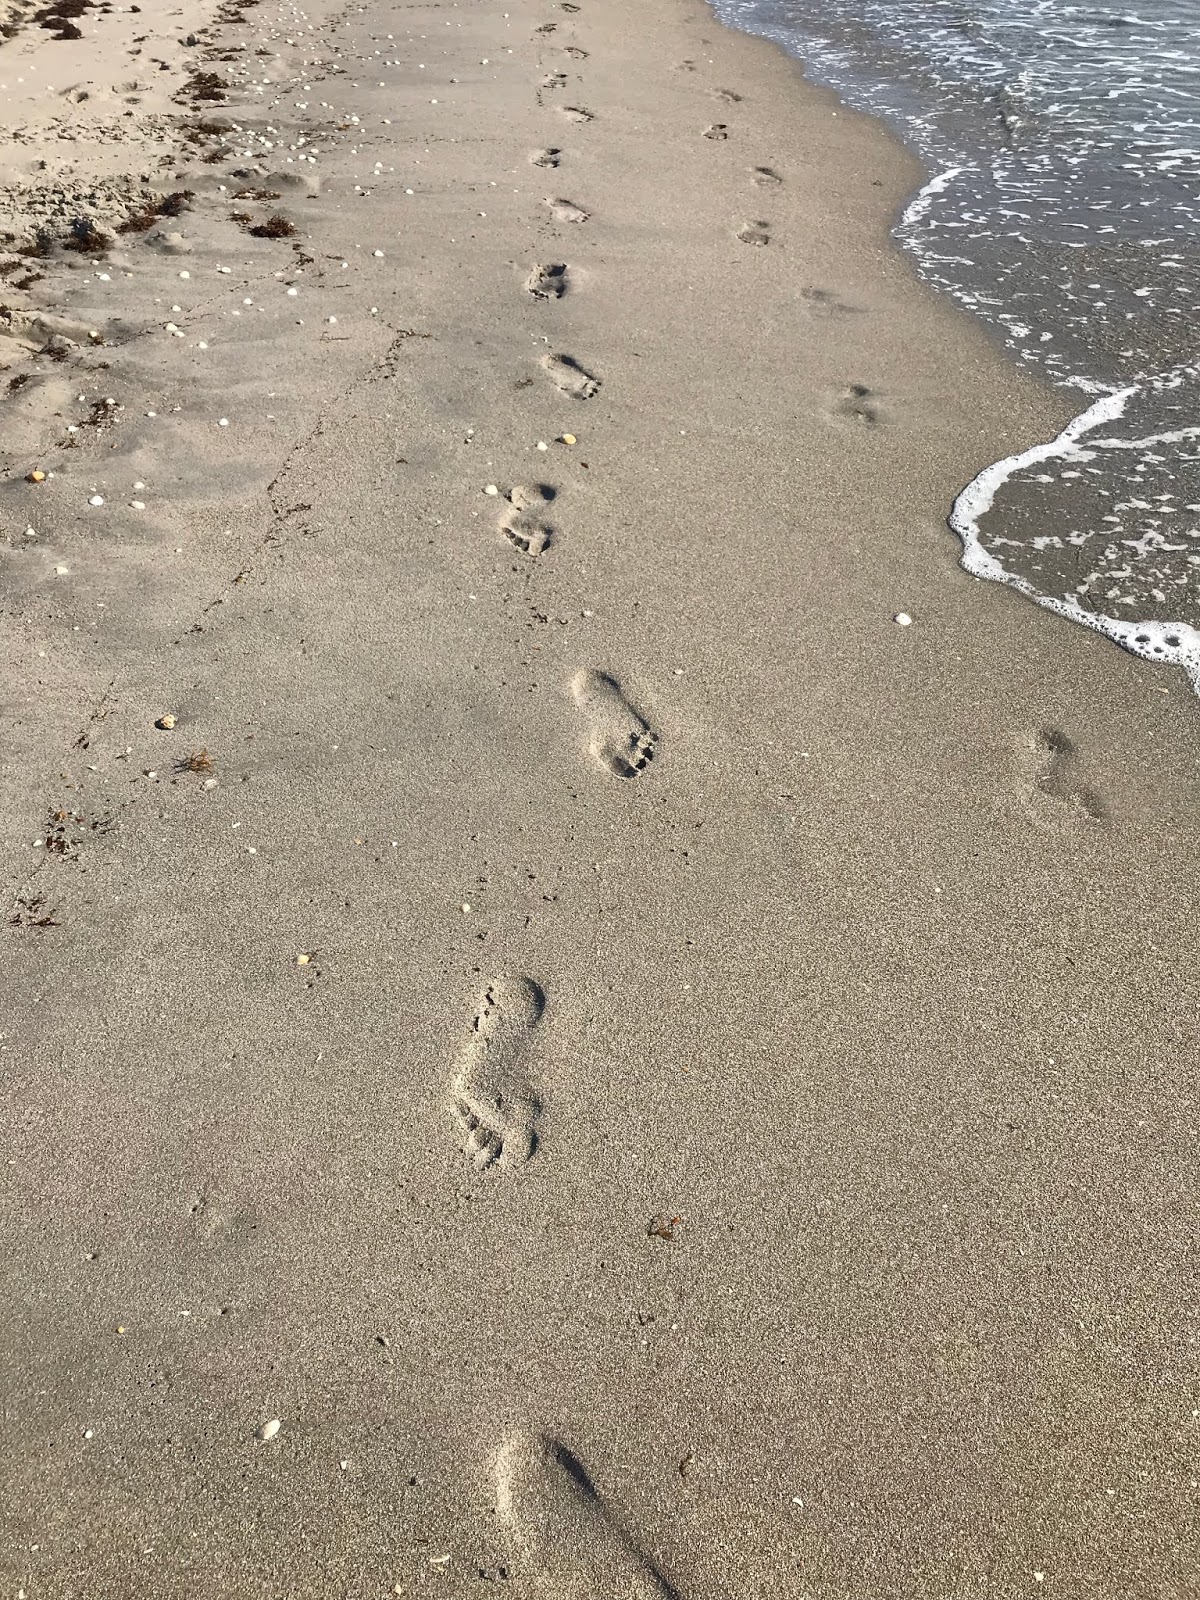 A Bob's Life: Footprints in the Sand